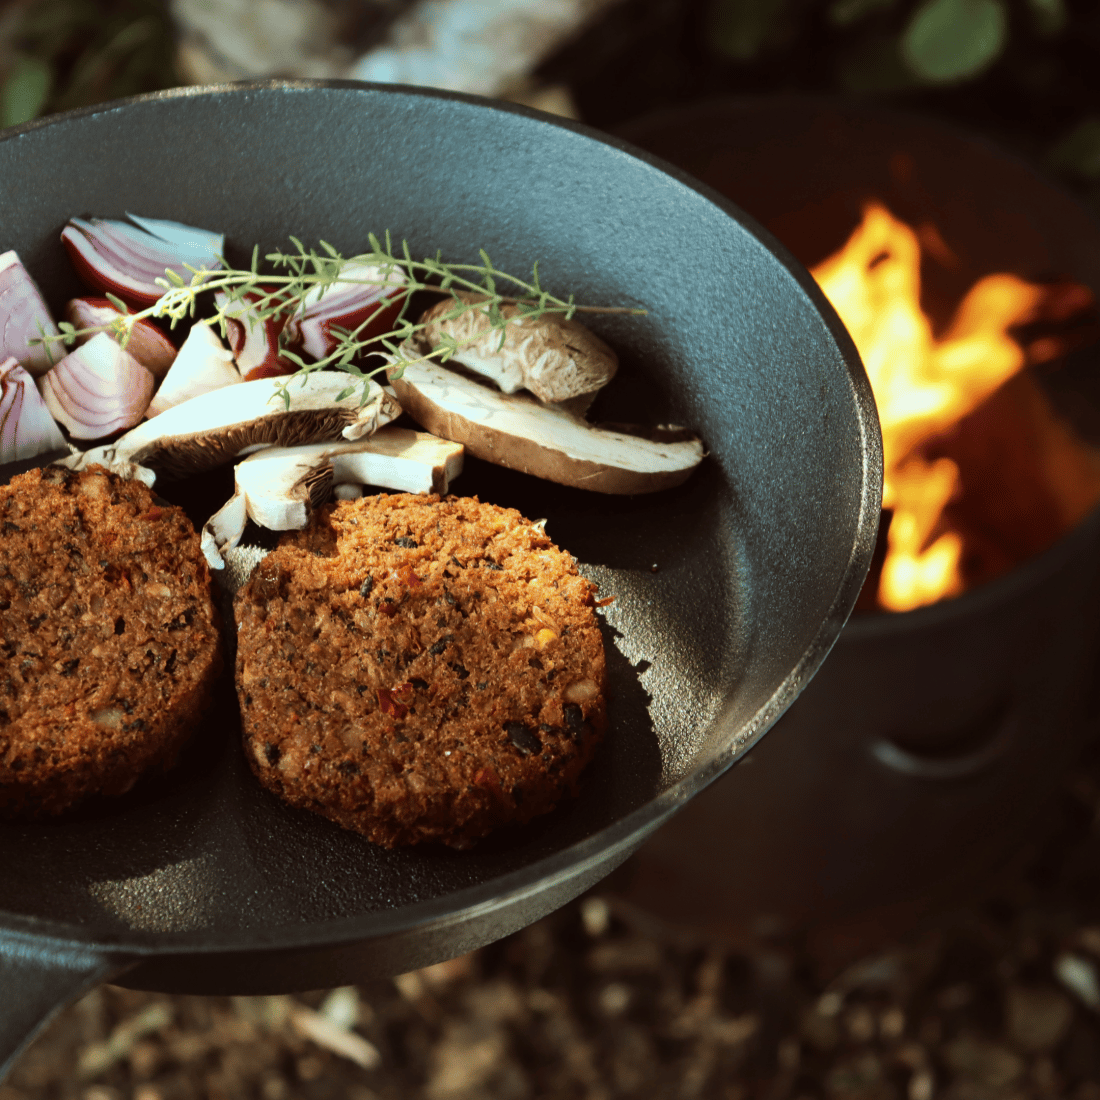 Back to basics outdoor cooking